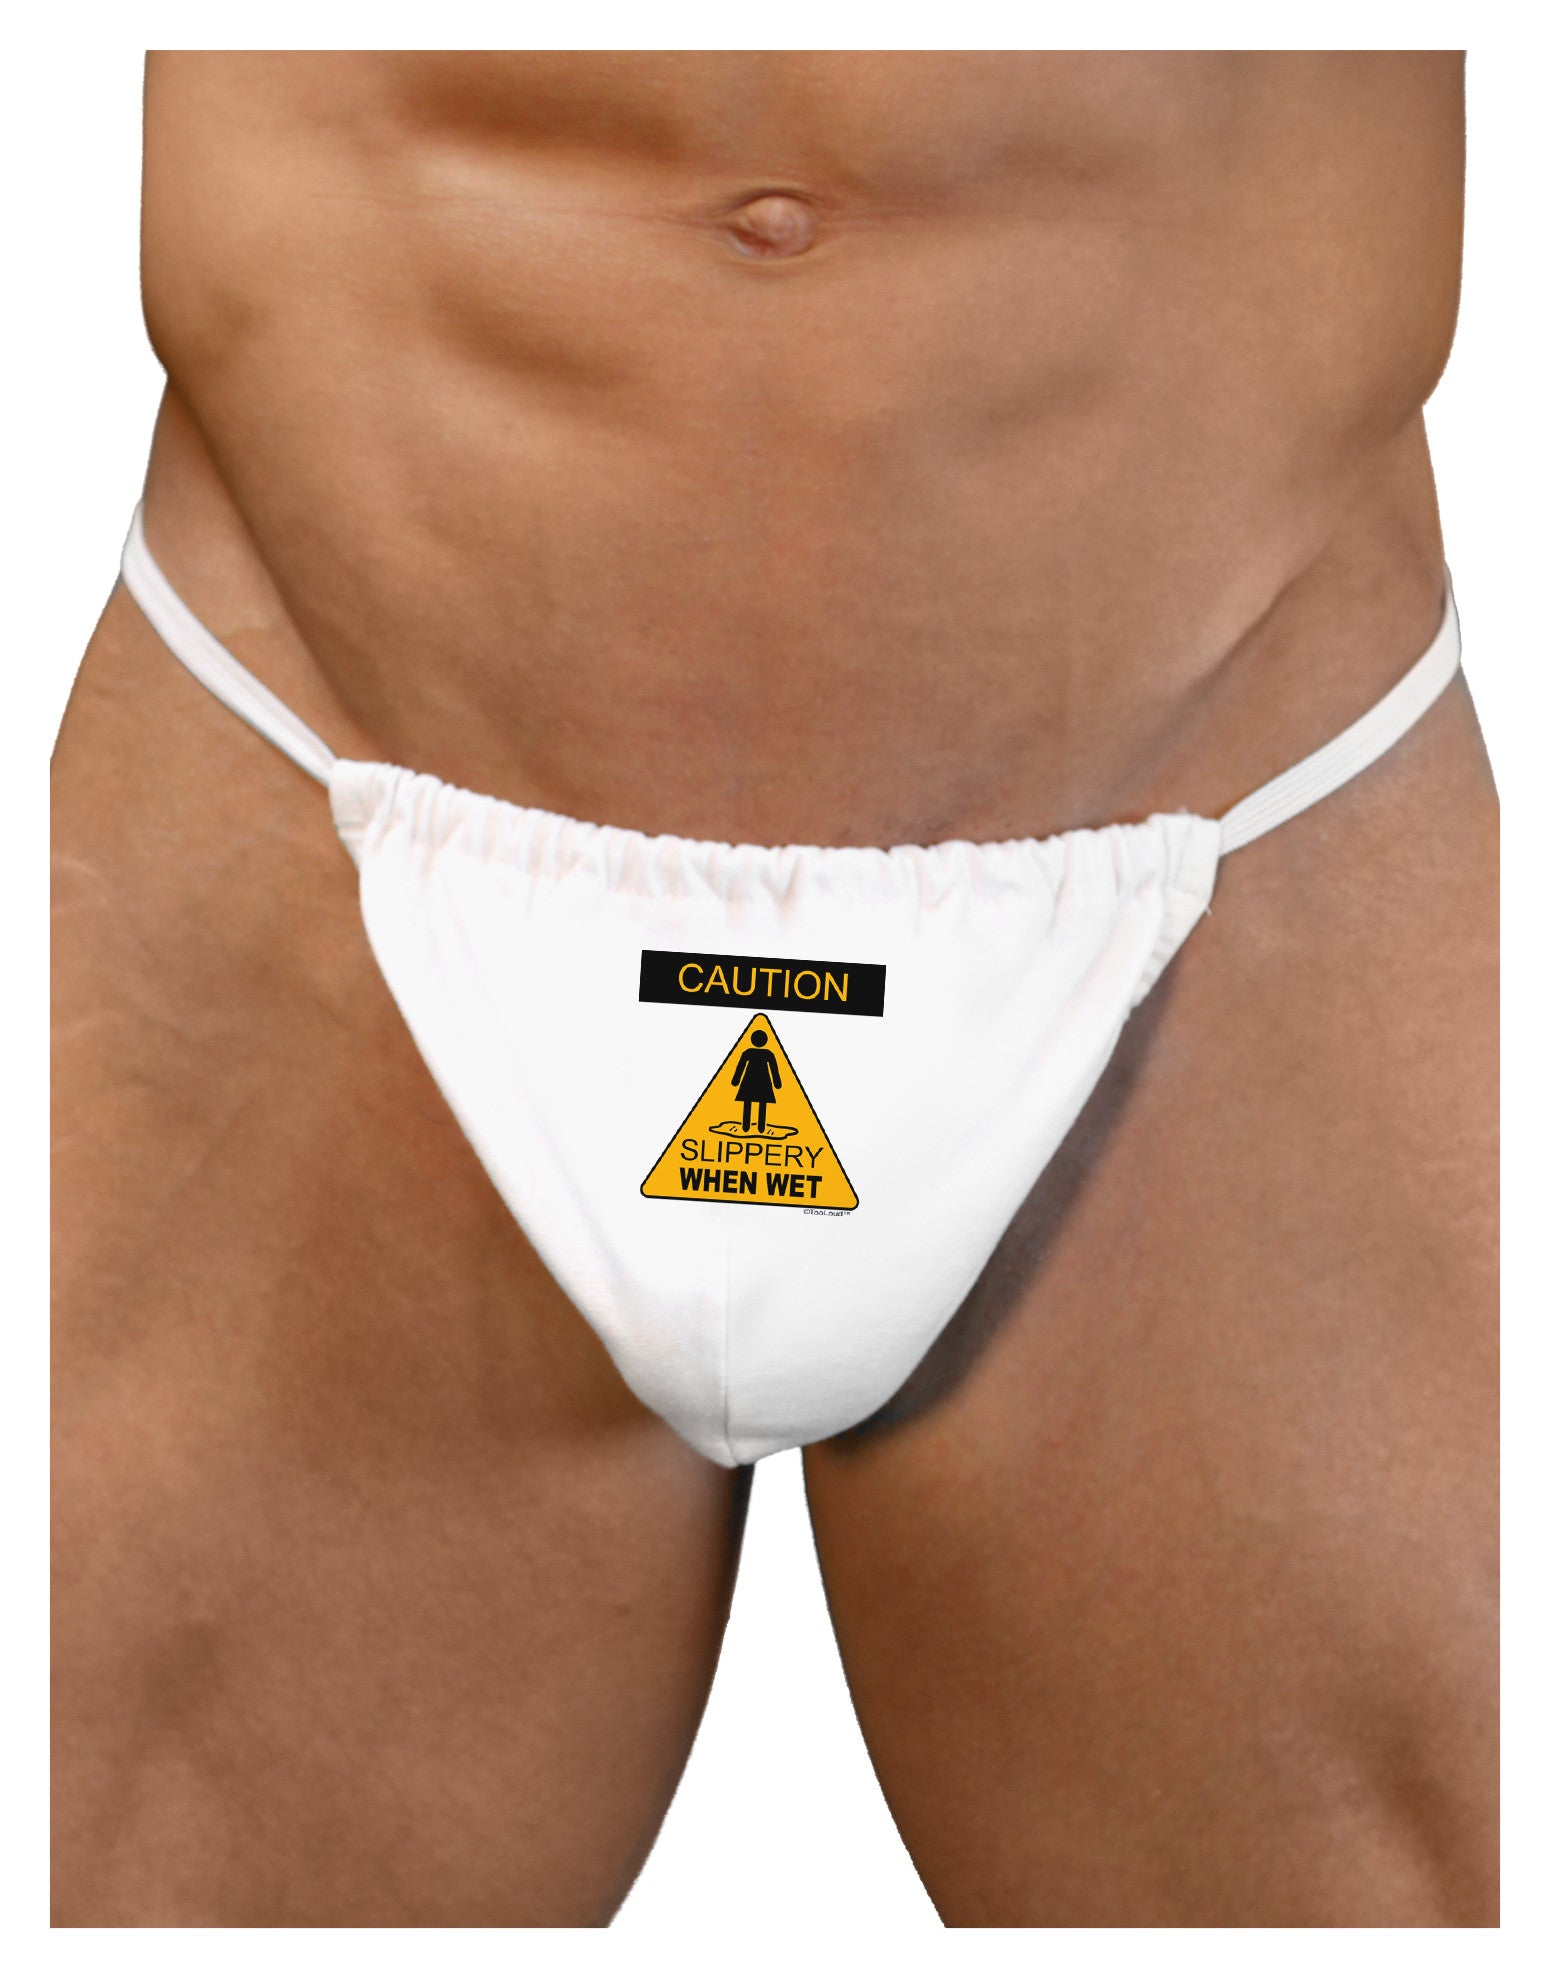 andy stenson recommends Slippery When Wet Thong